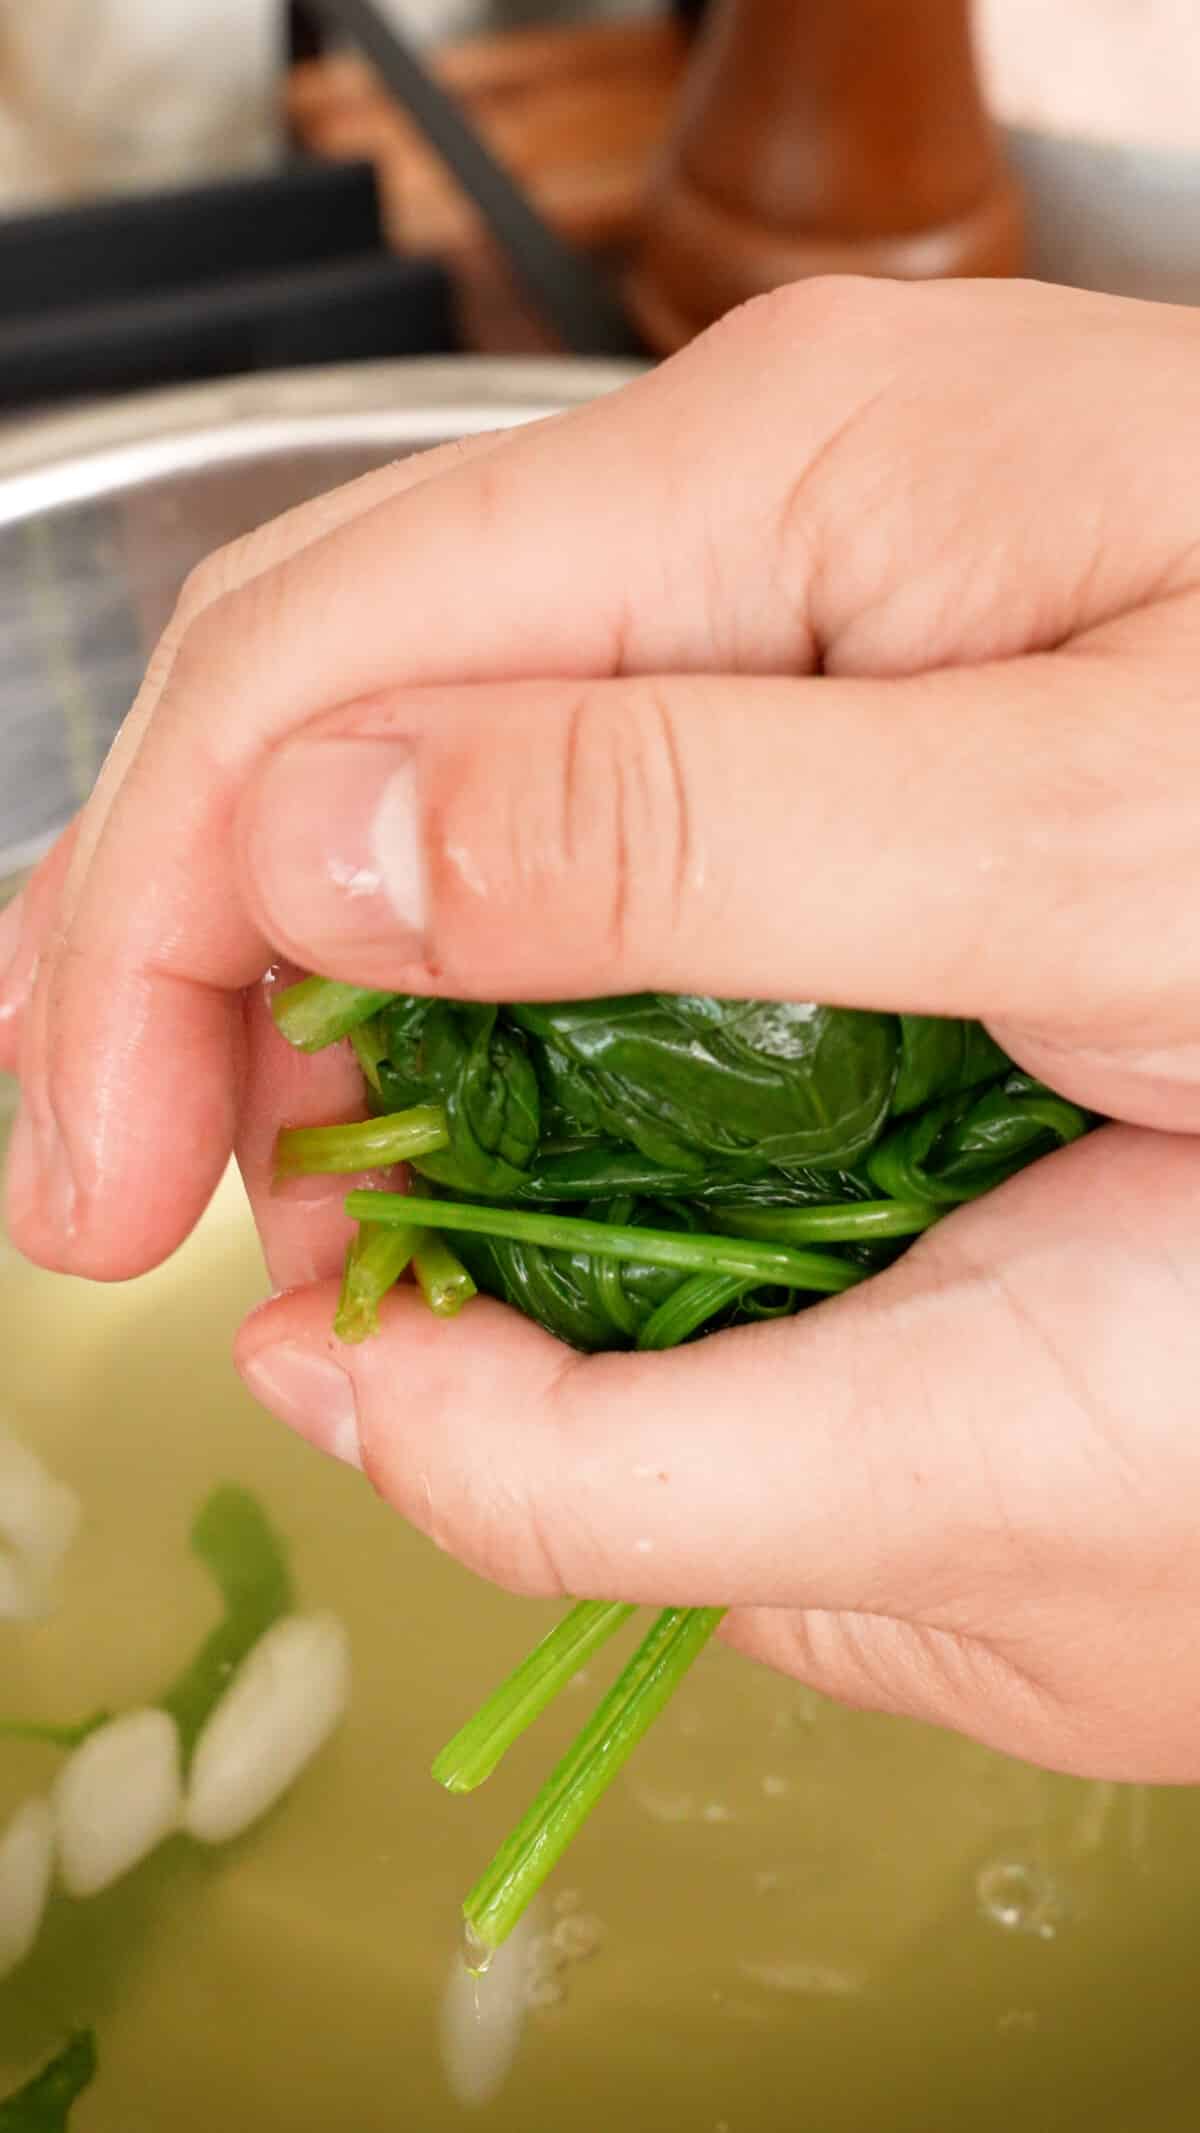 Hands squeezing water out of spinach.